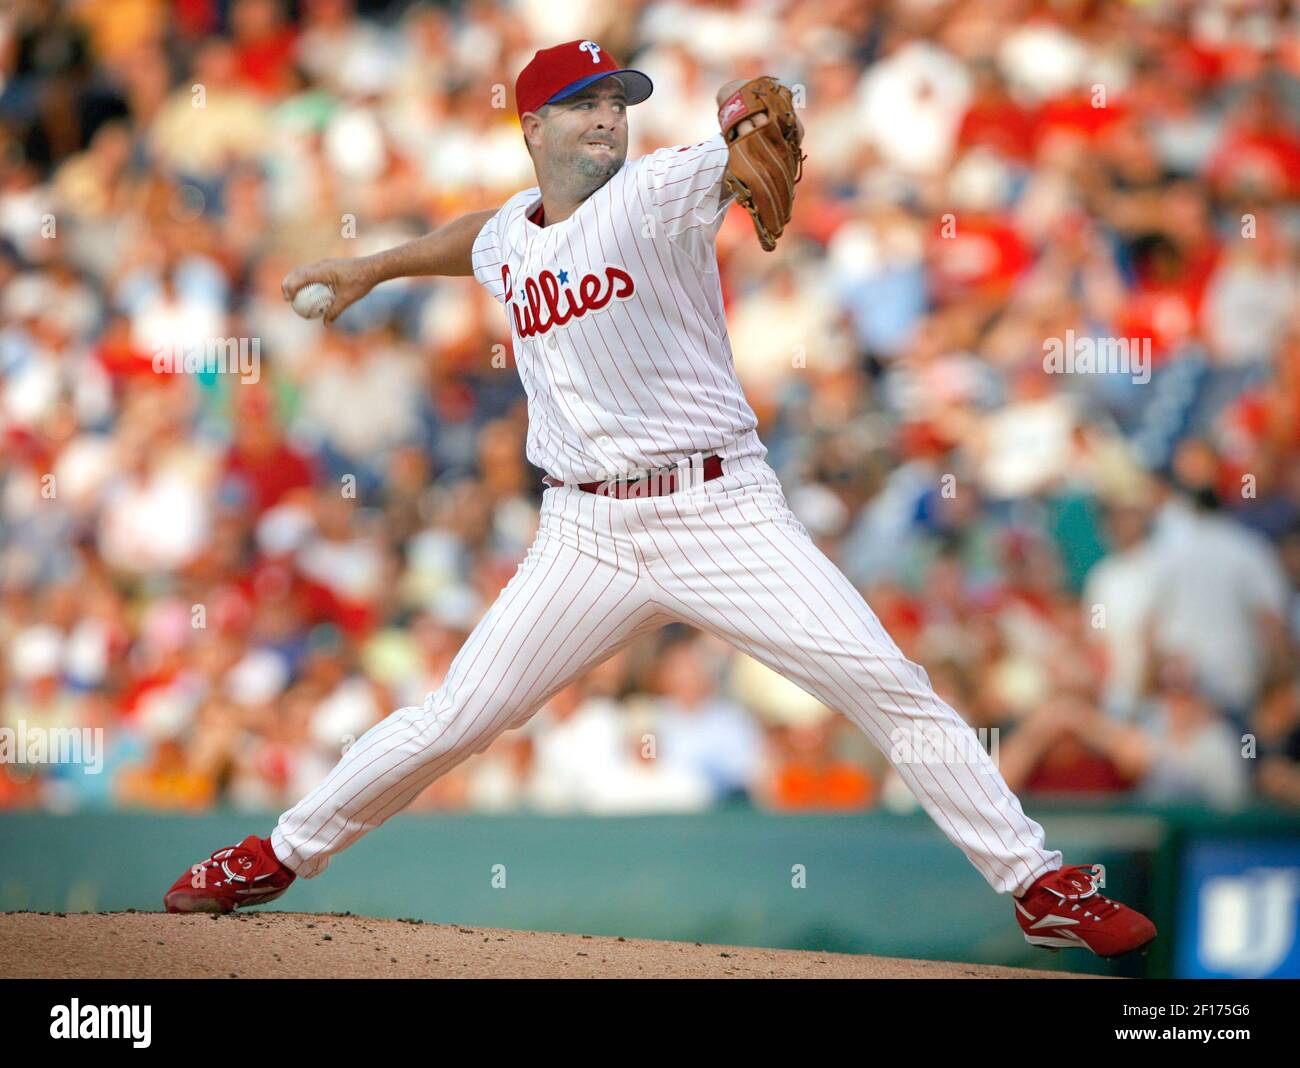 Philadelphia Phillies' starting pitcher Corey Lidle throws against the New York Yankees in the first inning at Citizens Bank Park in Philadelphia, Pennsylvania, on Tuesday, June 20, 2006. (Photo by Jerry Lodriguss/Philadelphia Inquirer/KRT) Stock Photo